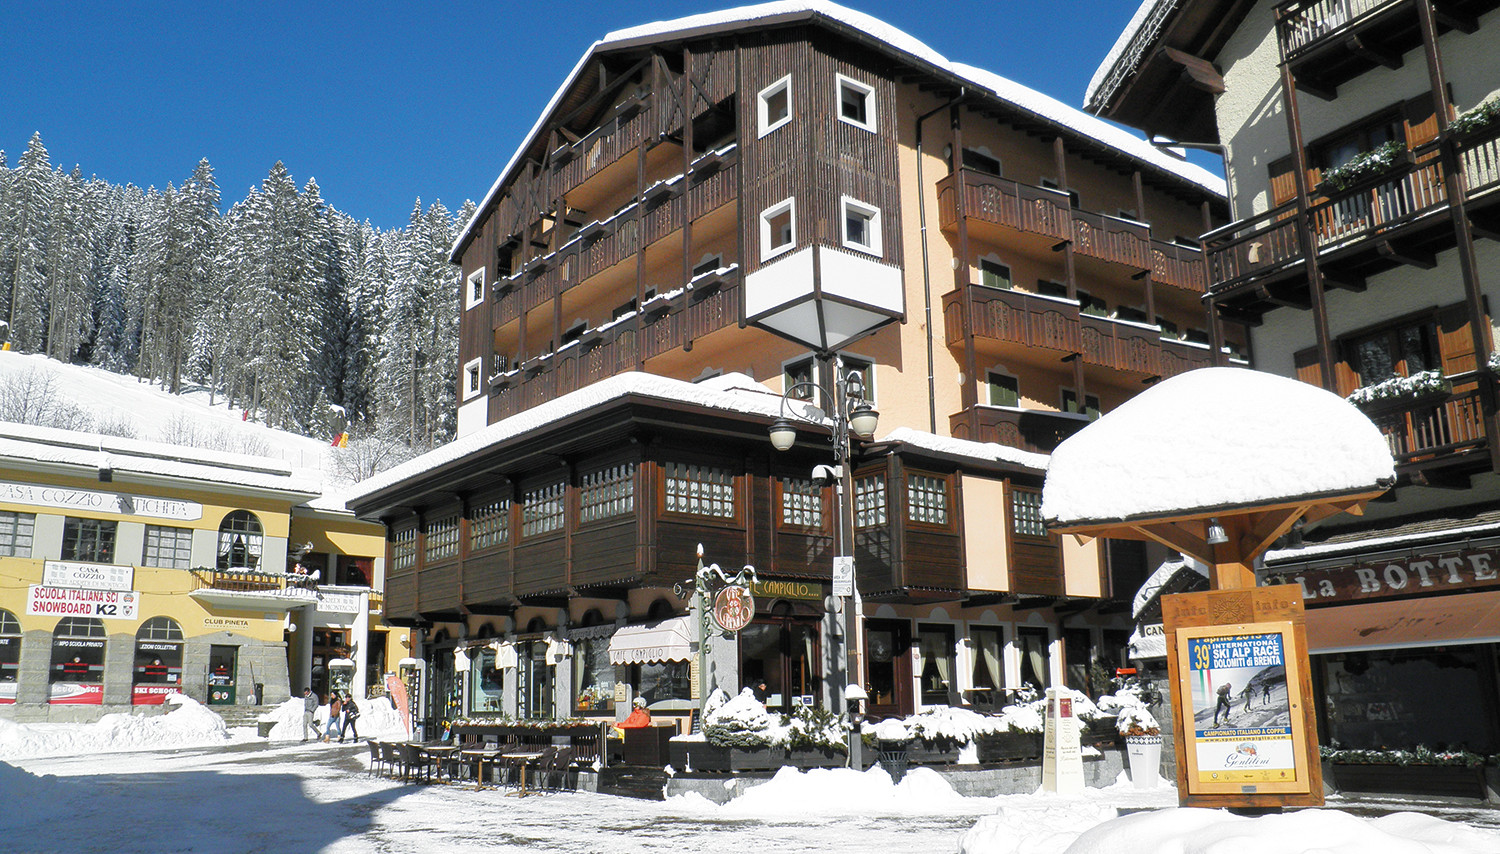 R.T.A. HOTEL RESIDENCE SPORT CAMPIGLIO